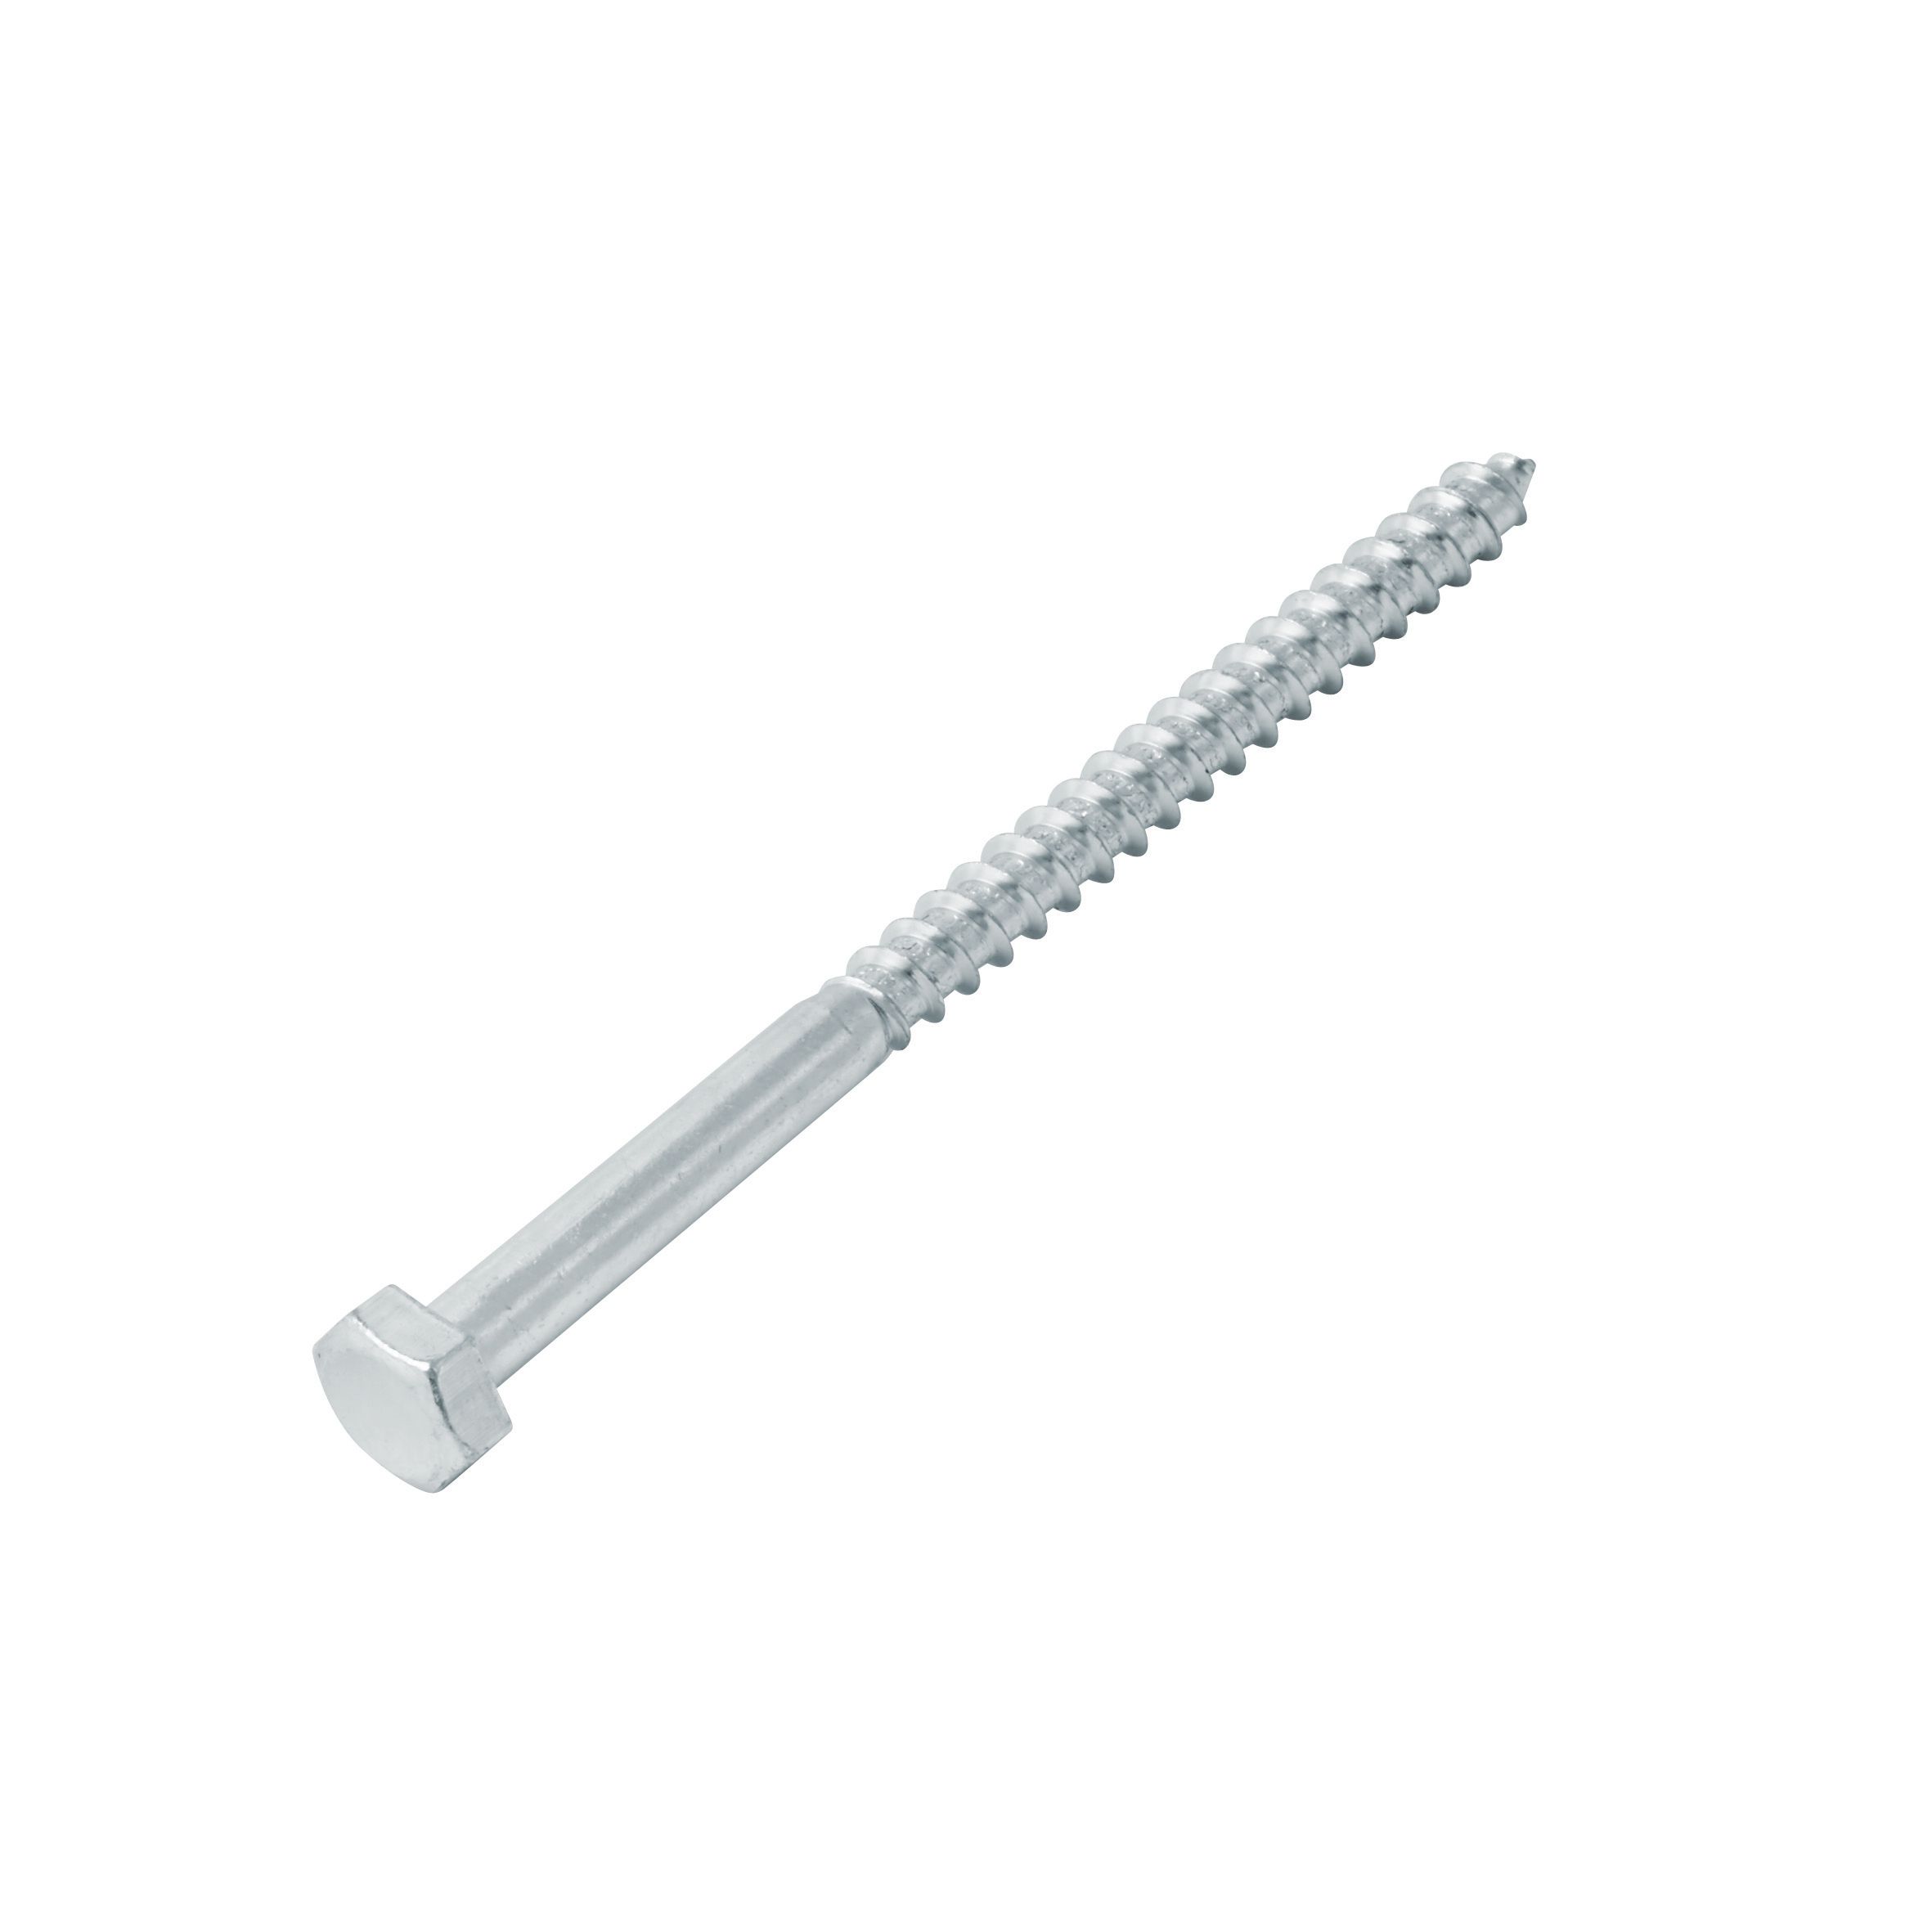 Image of Wickes Coach Screws - M10 x 130mm Pack of 6